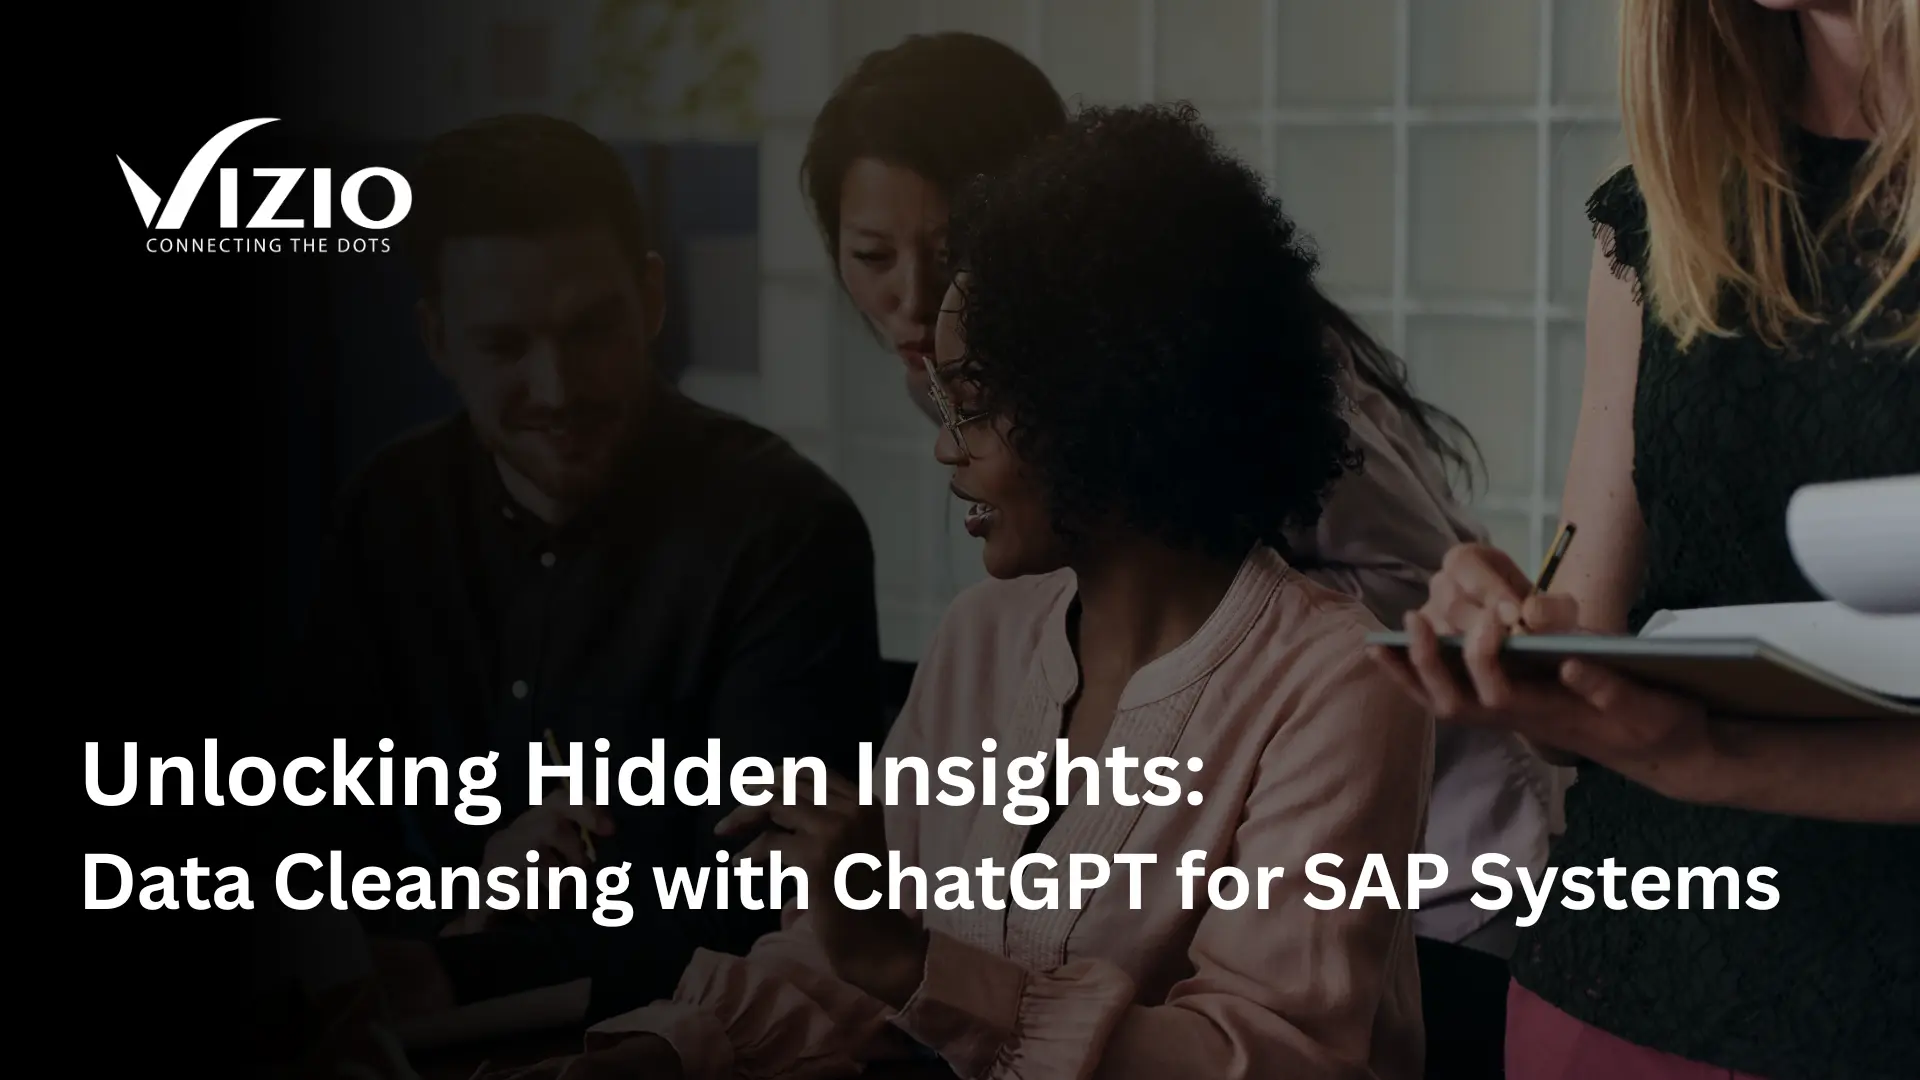 Data Cleansing with ChatGPT for SAP Systems